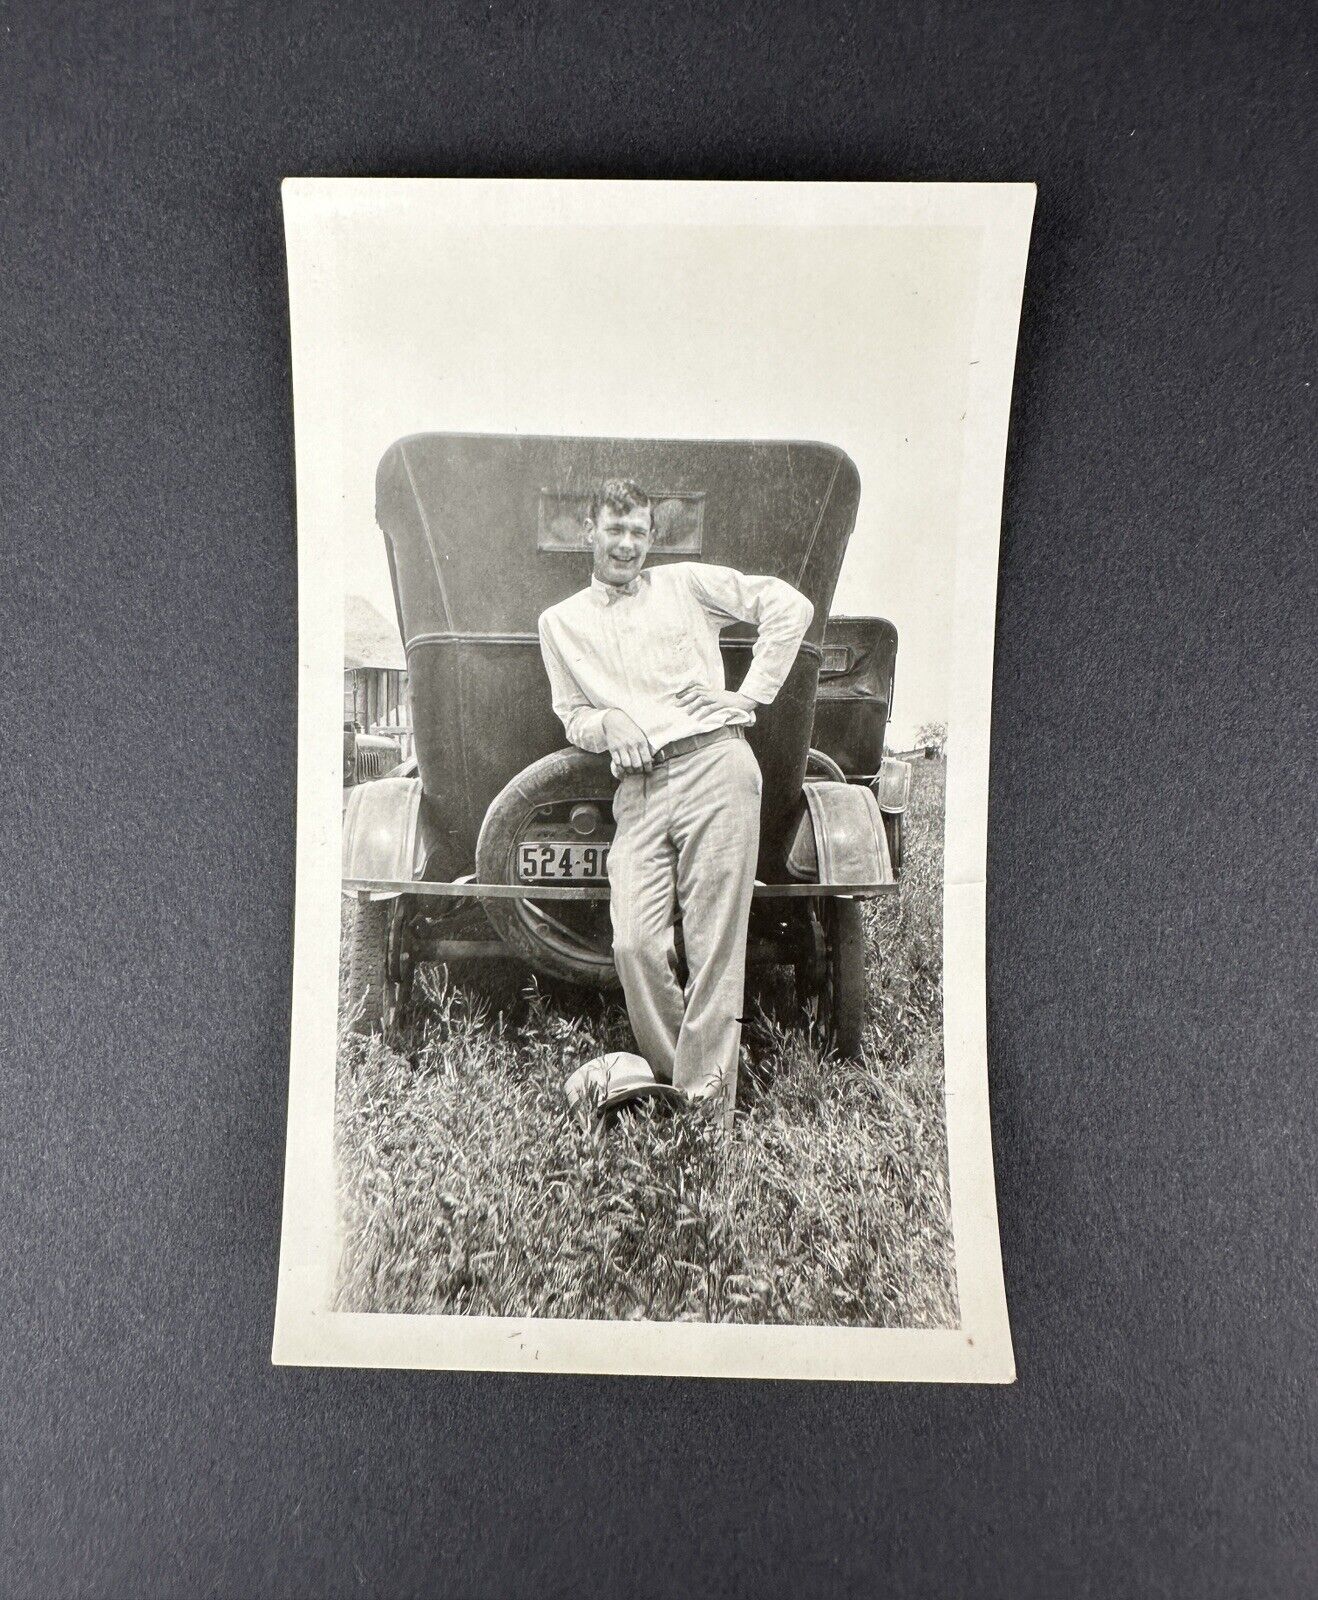 1926 Man Standing in Front of Automobile Photo Snapshot 5 x 3 Vintage